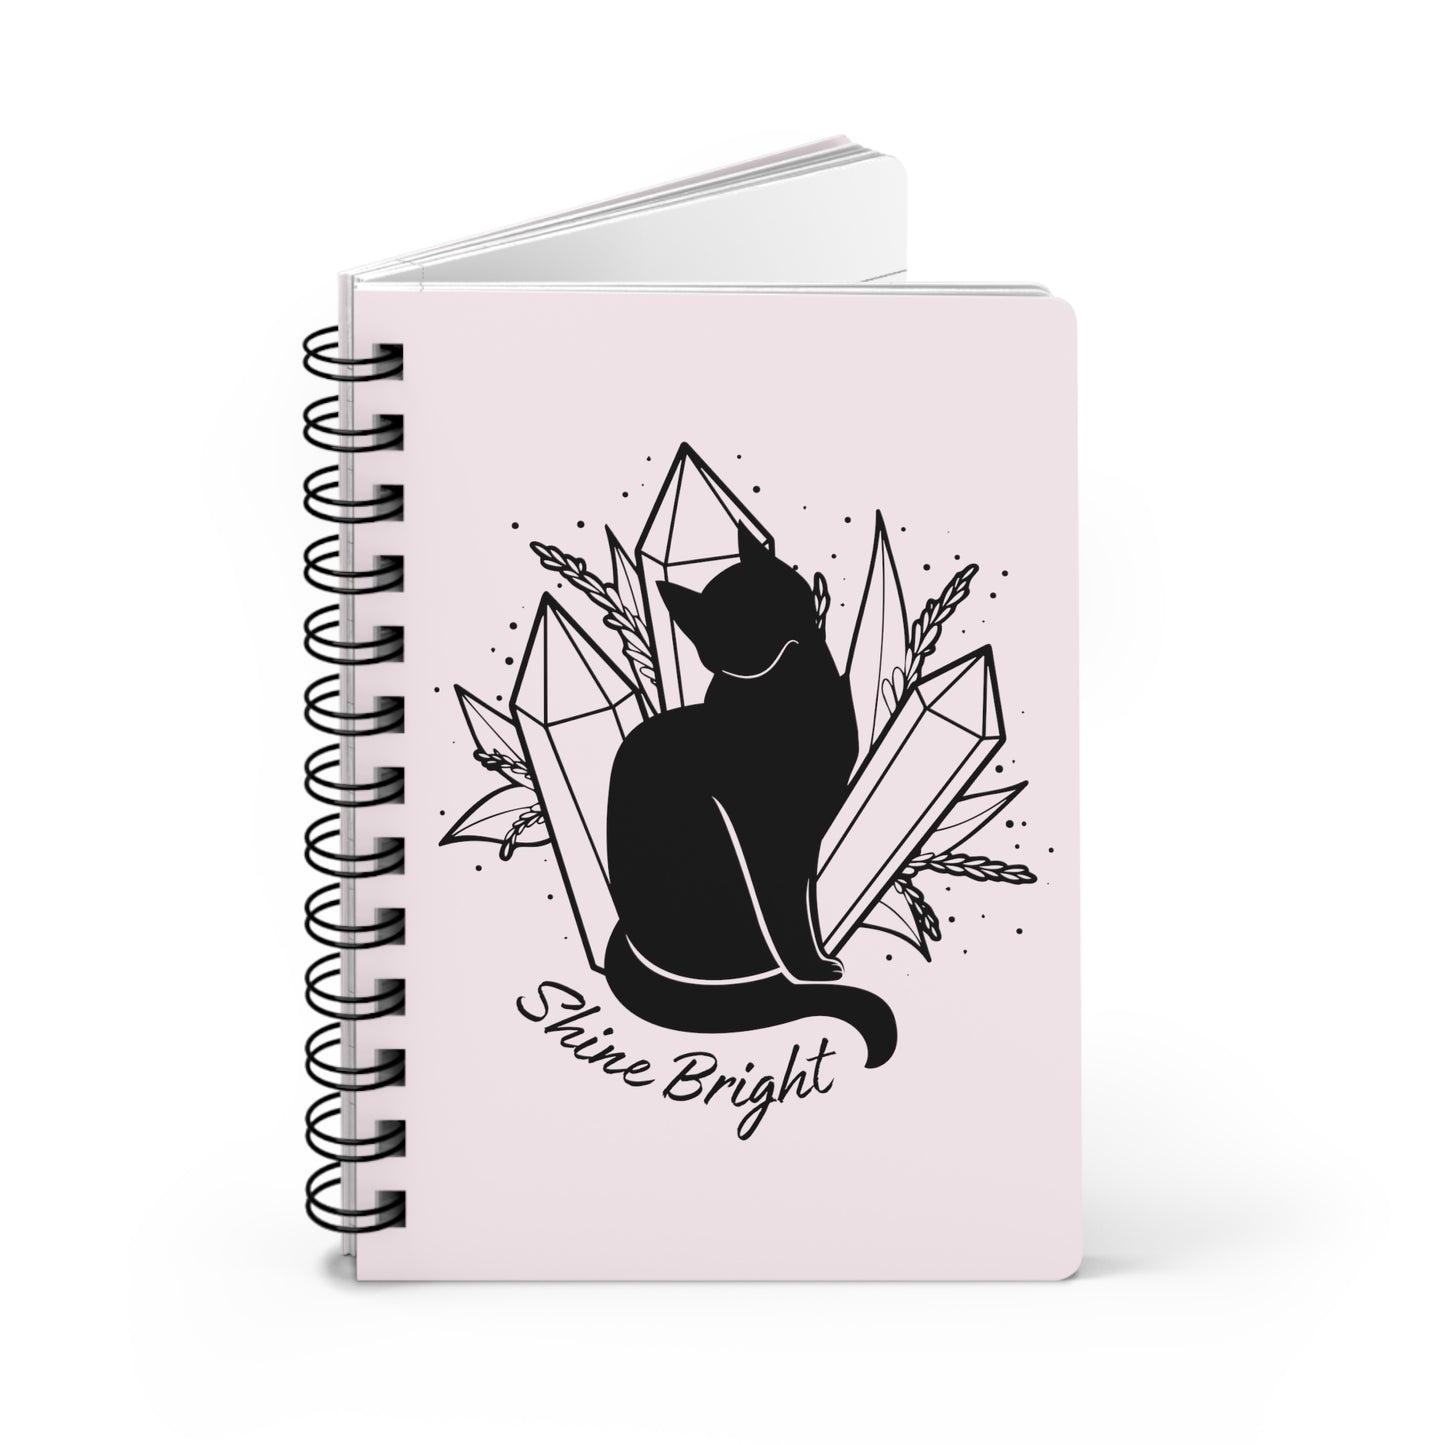 Witchy Crystals and Cat Spiral Bound Journal, Black Cat Familiar Notebook, Celestial Mystical Journal, Cute Whimsical Magical Notebook